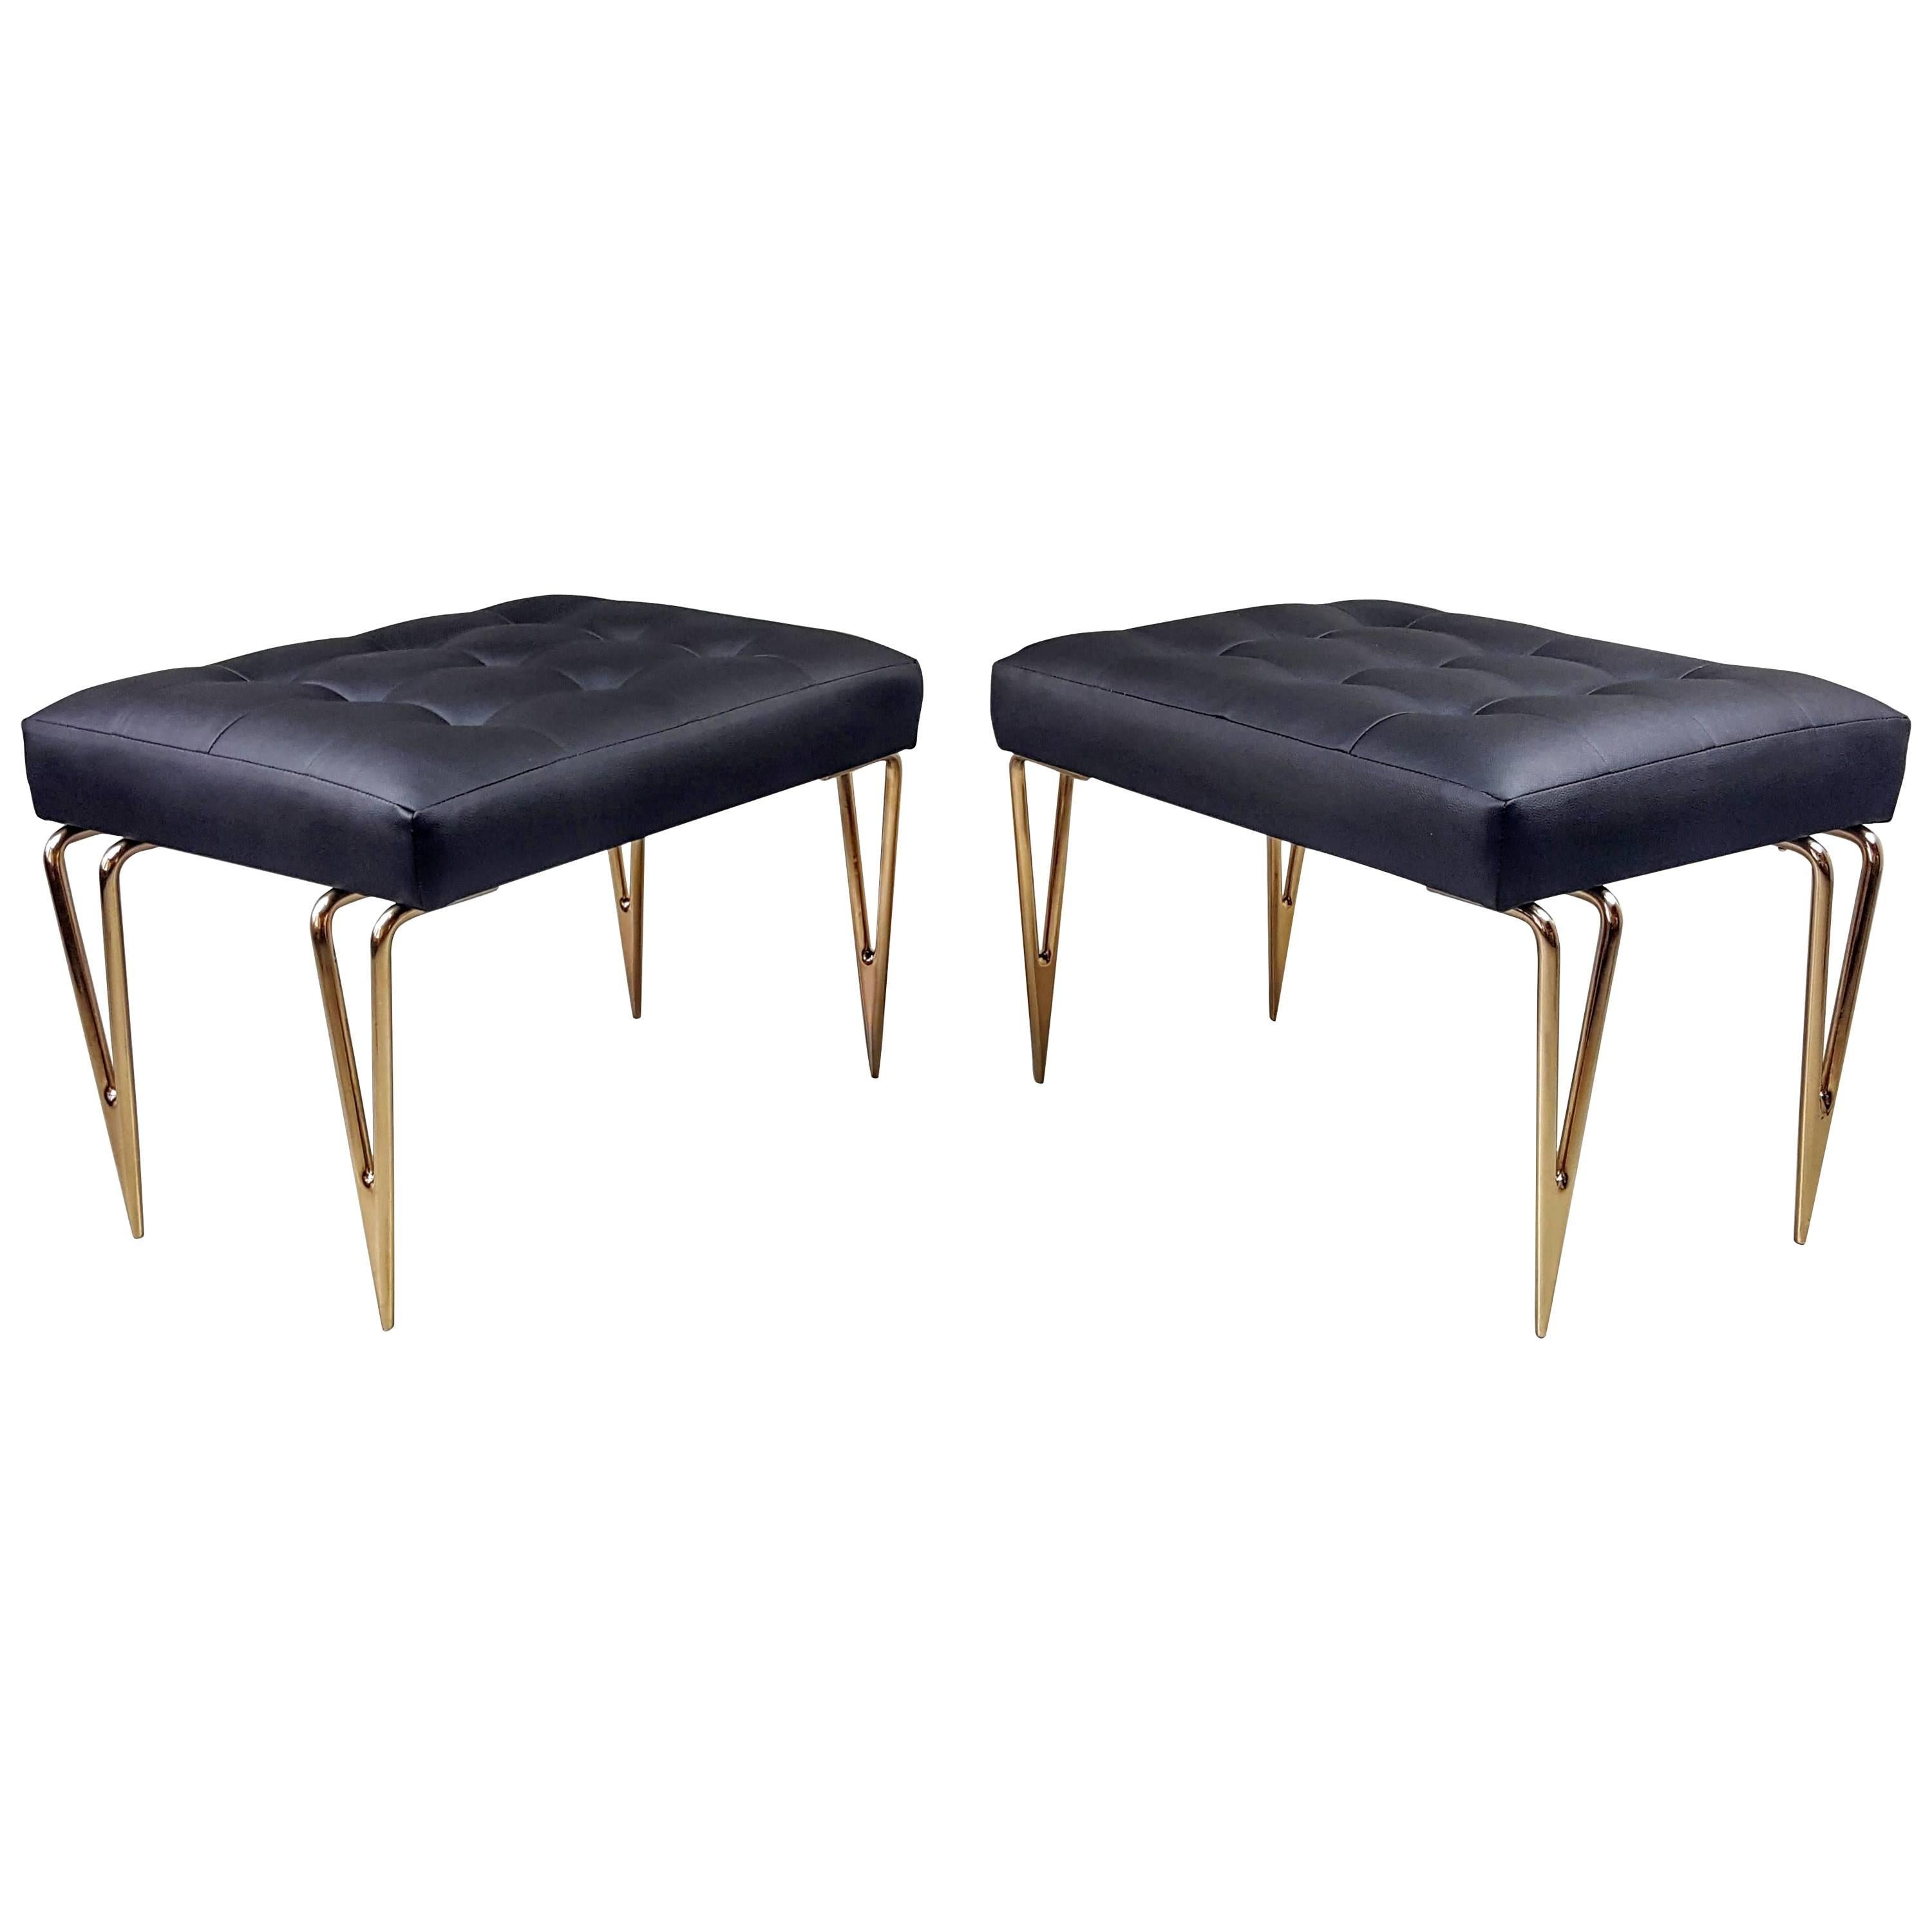 Pair of Hand-Forged Mirrored Bronze "Tweezer" Leg Stools in Italian Leather